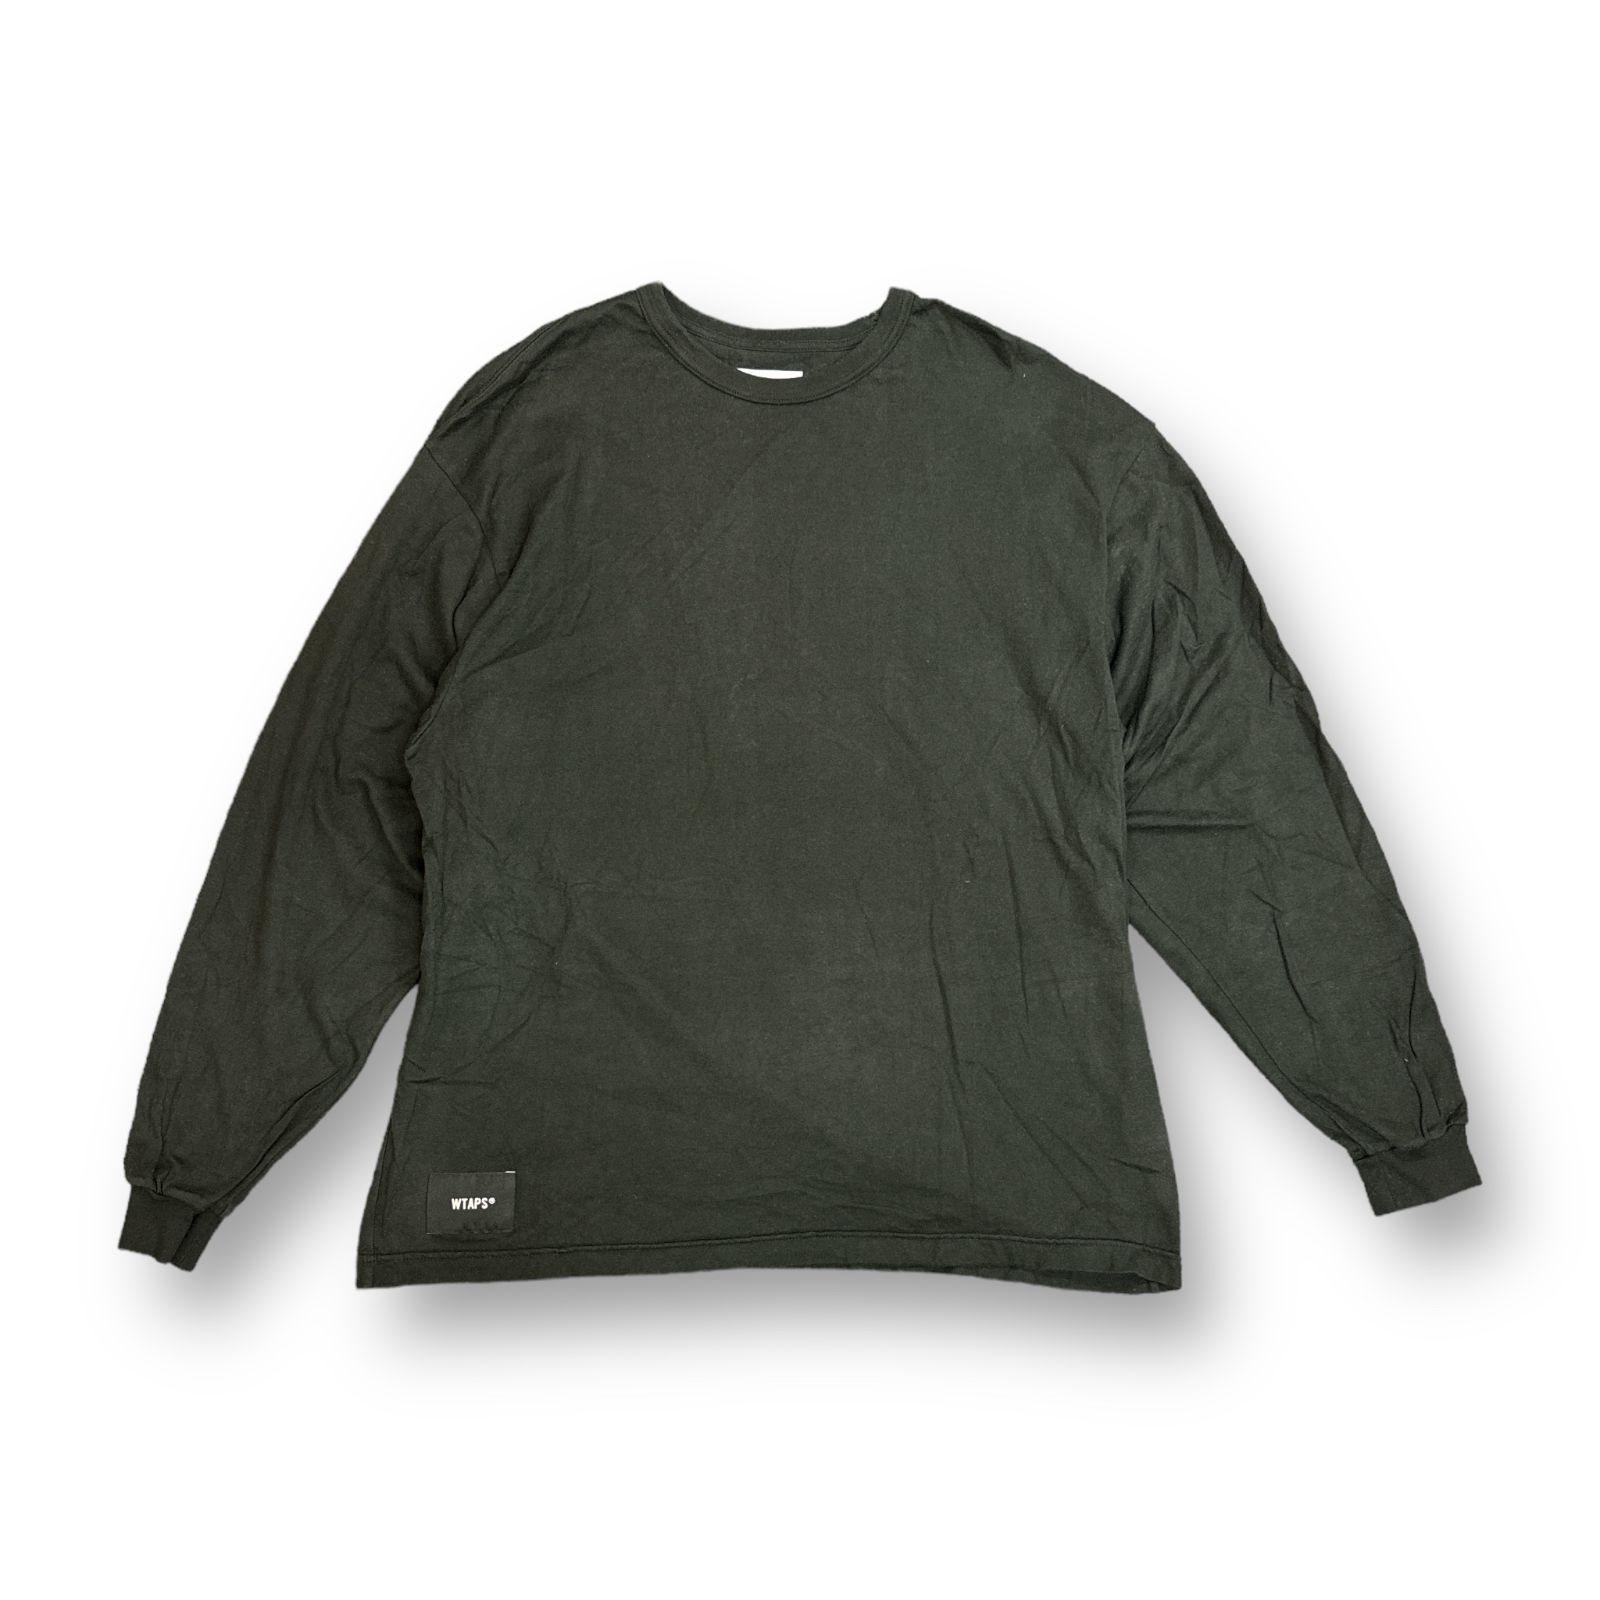 WTAPS 21AW GPS LS COTTON 212ATDT-CSM23 プリント カットソー ダブル 